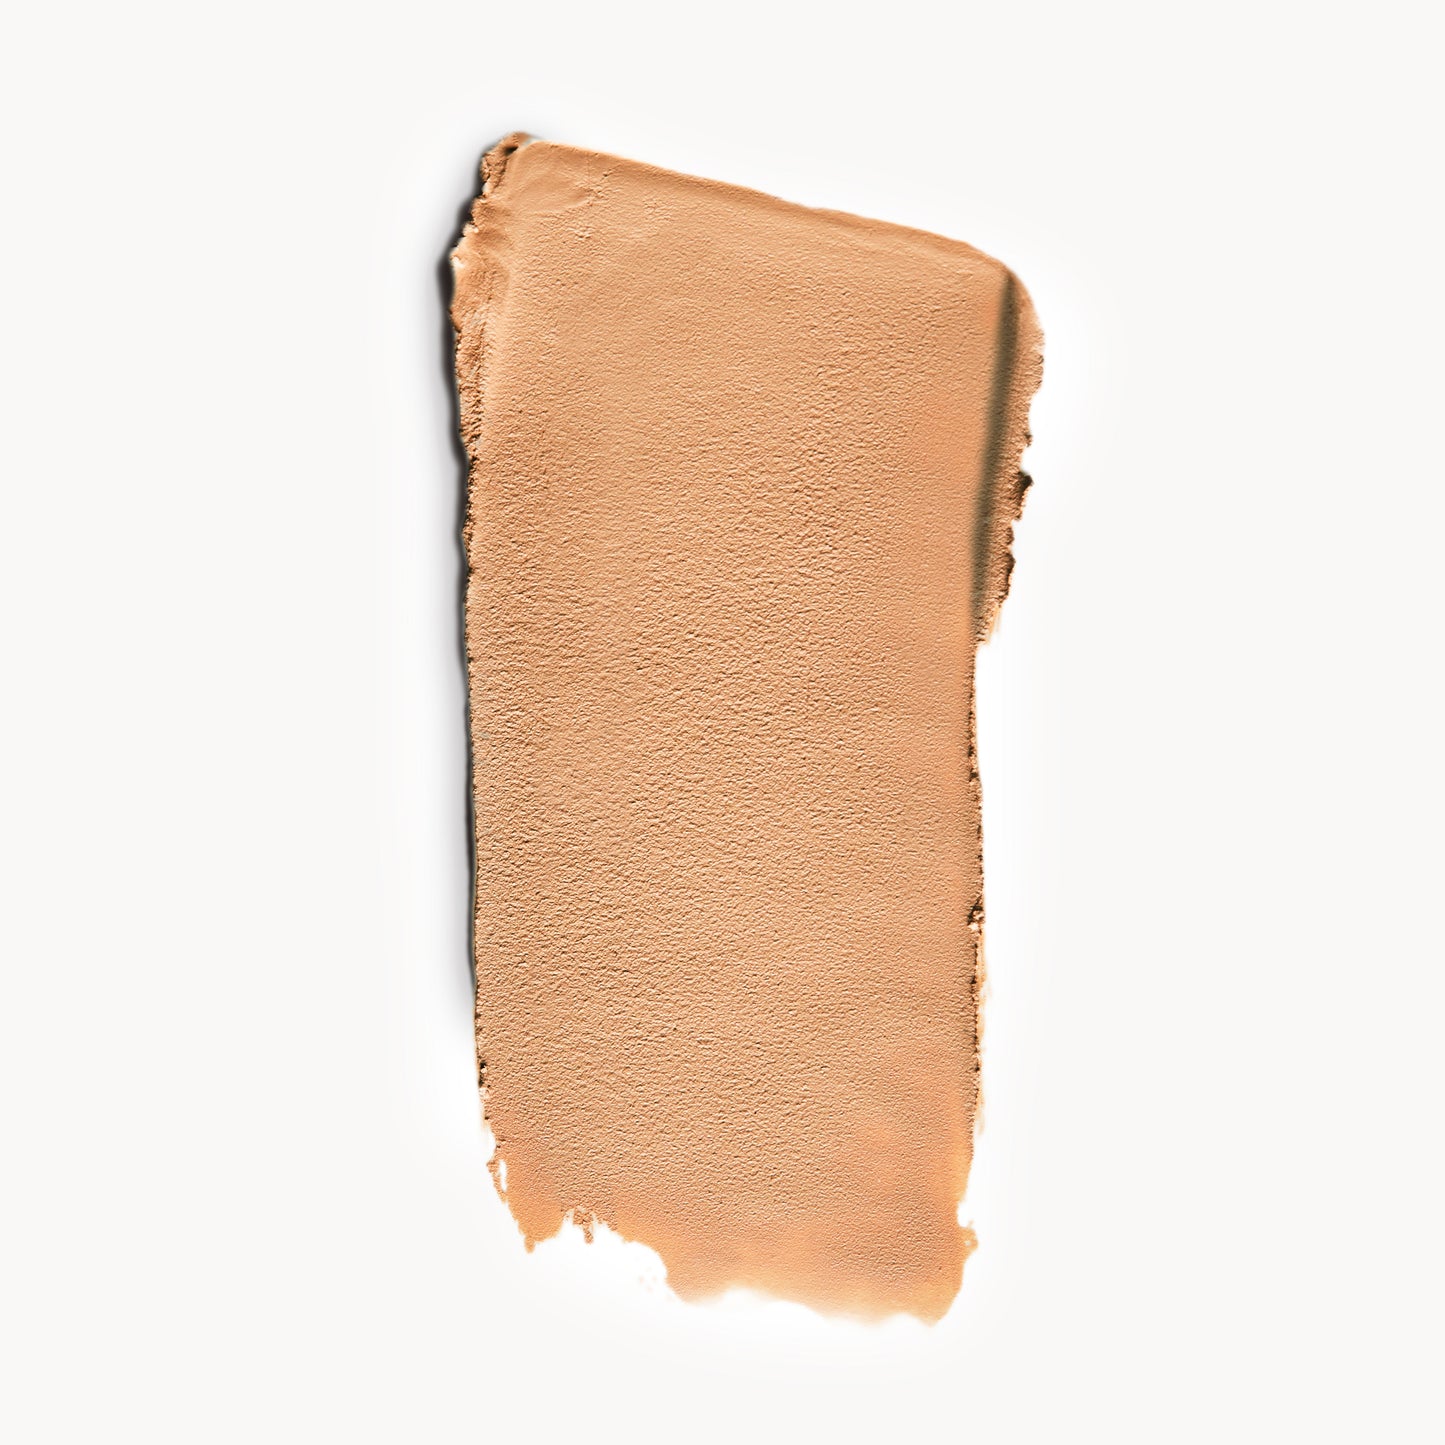 A wipe of medium, neutral-toned cream foundation on a white background